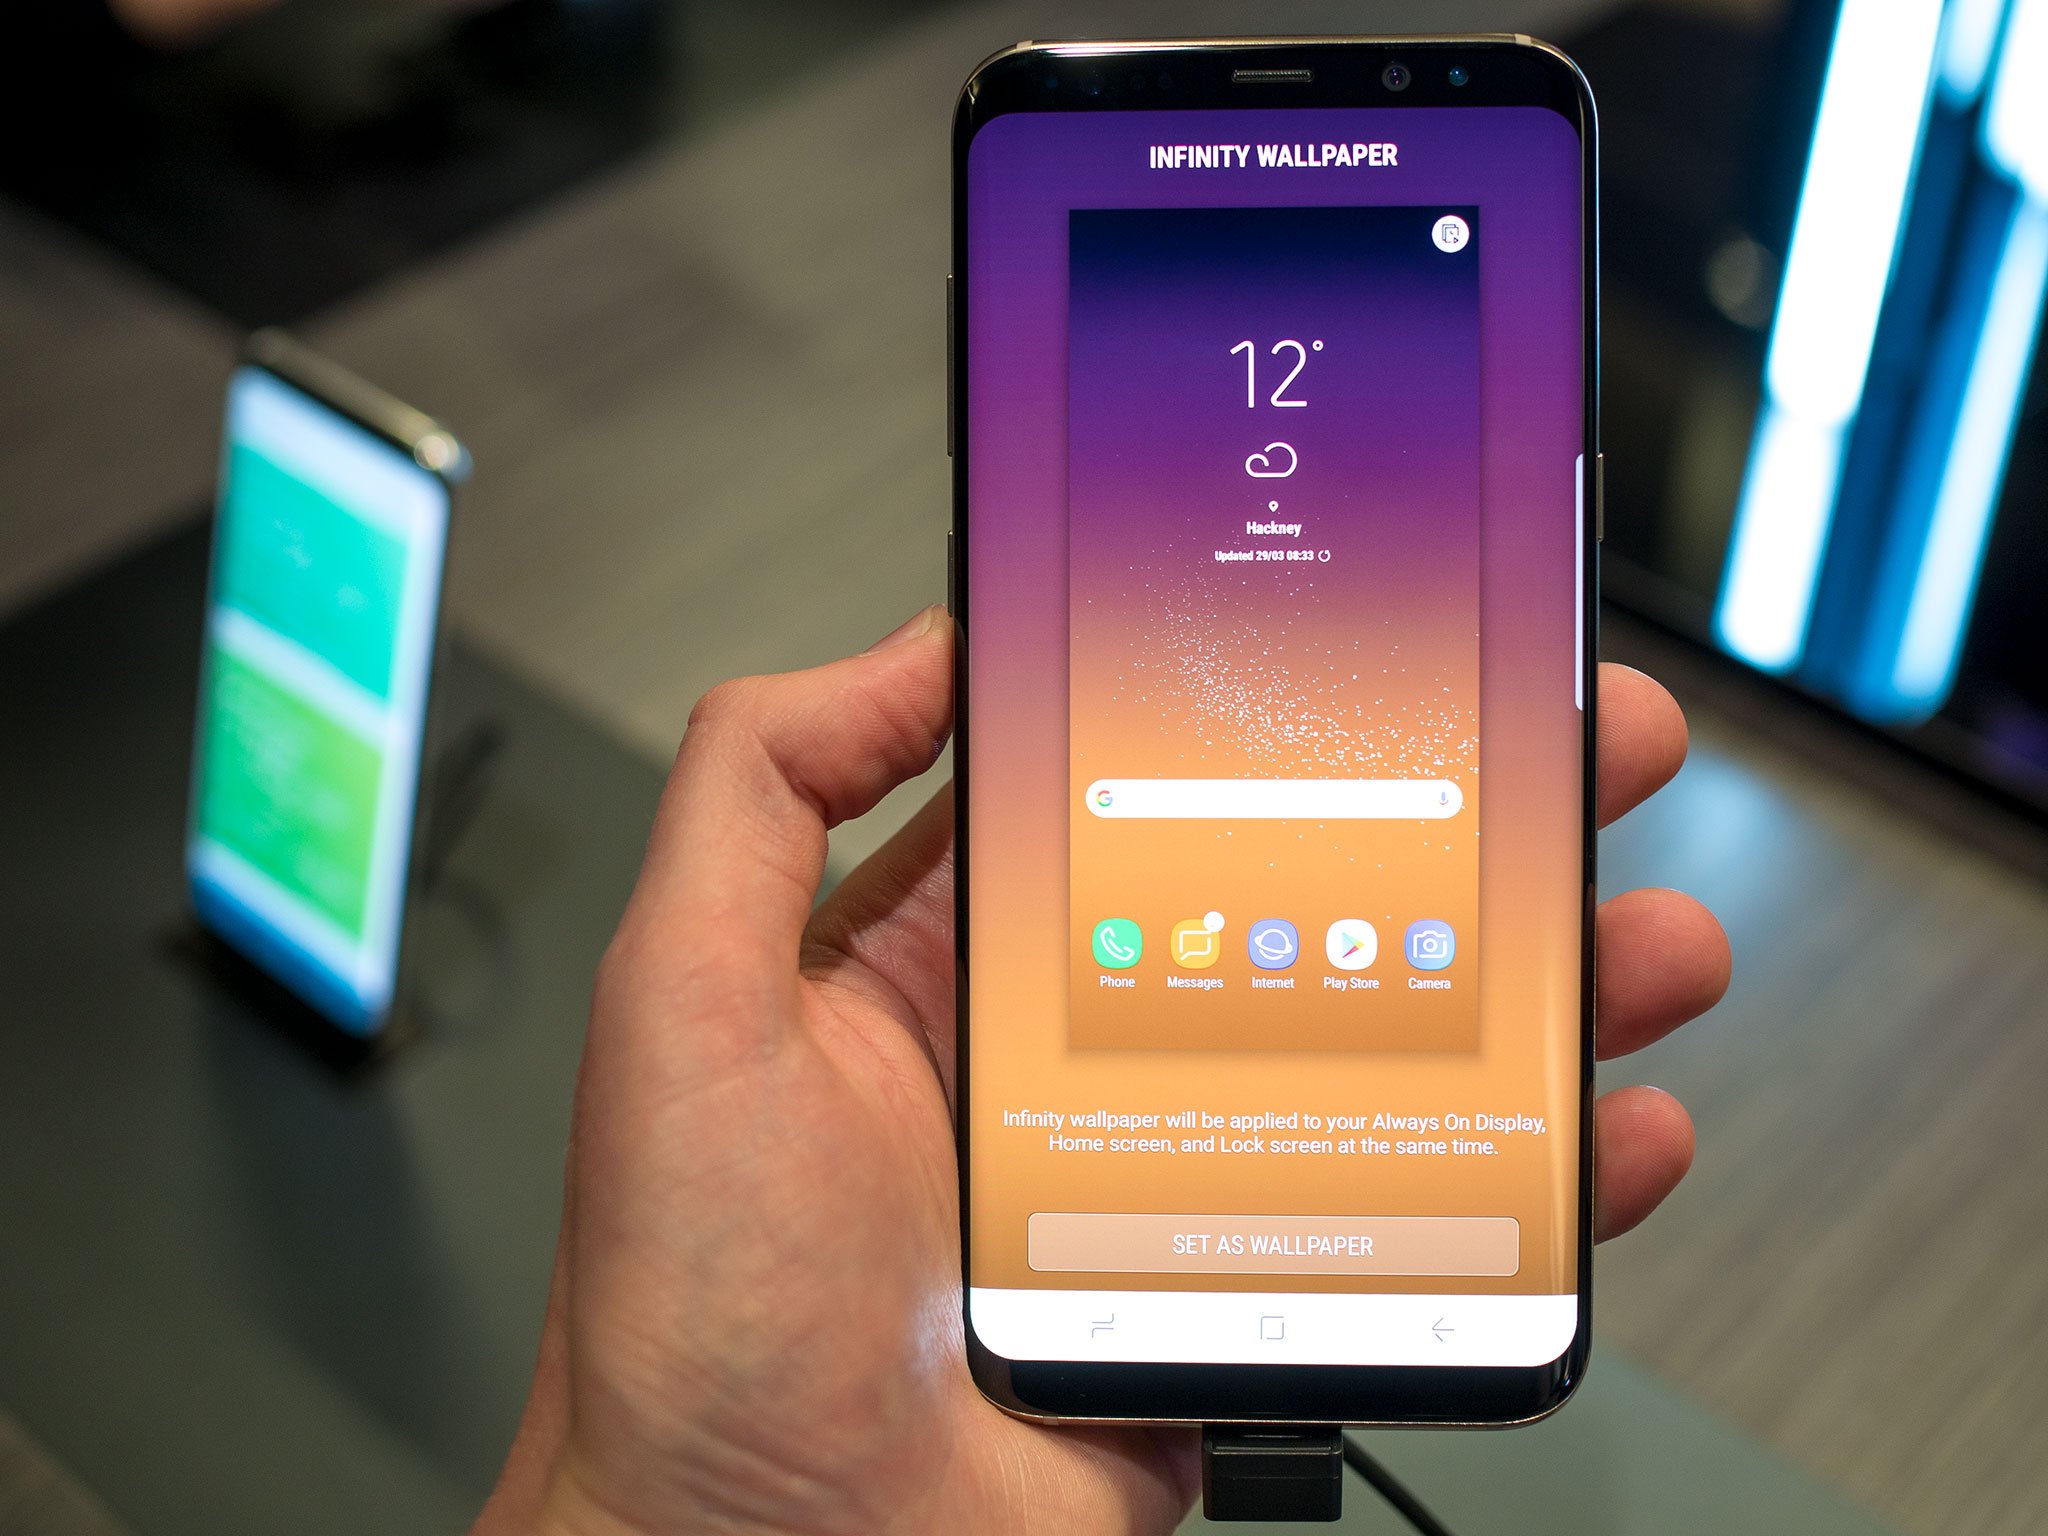 The Galaxy S8 S New Infinity Wallpapers Are Awesome Here S How They Work Android Central